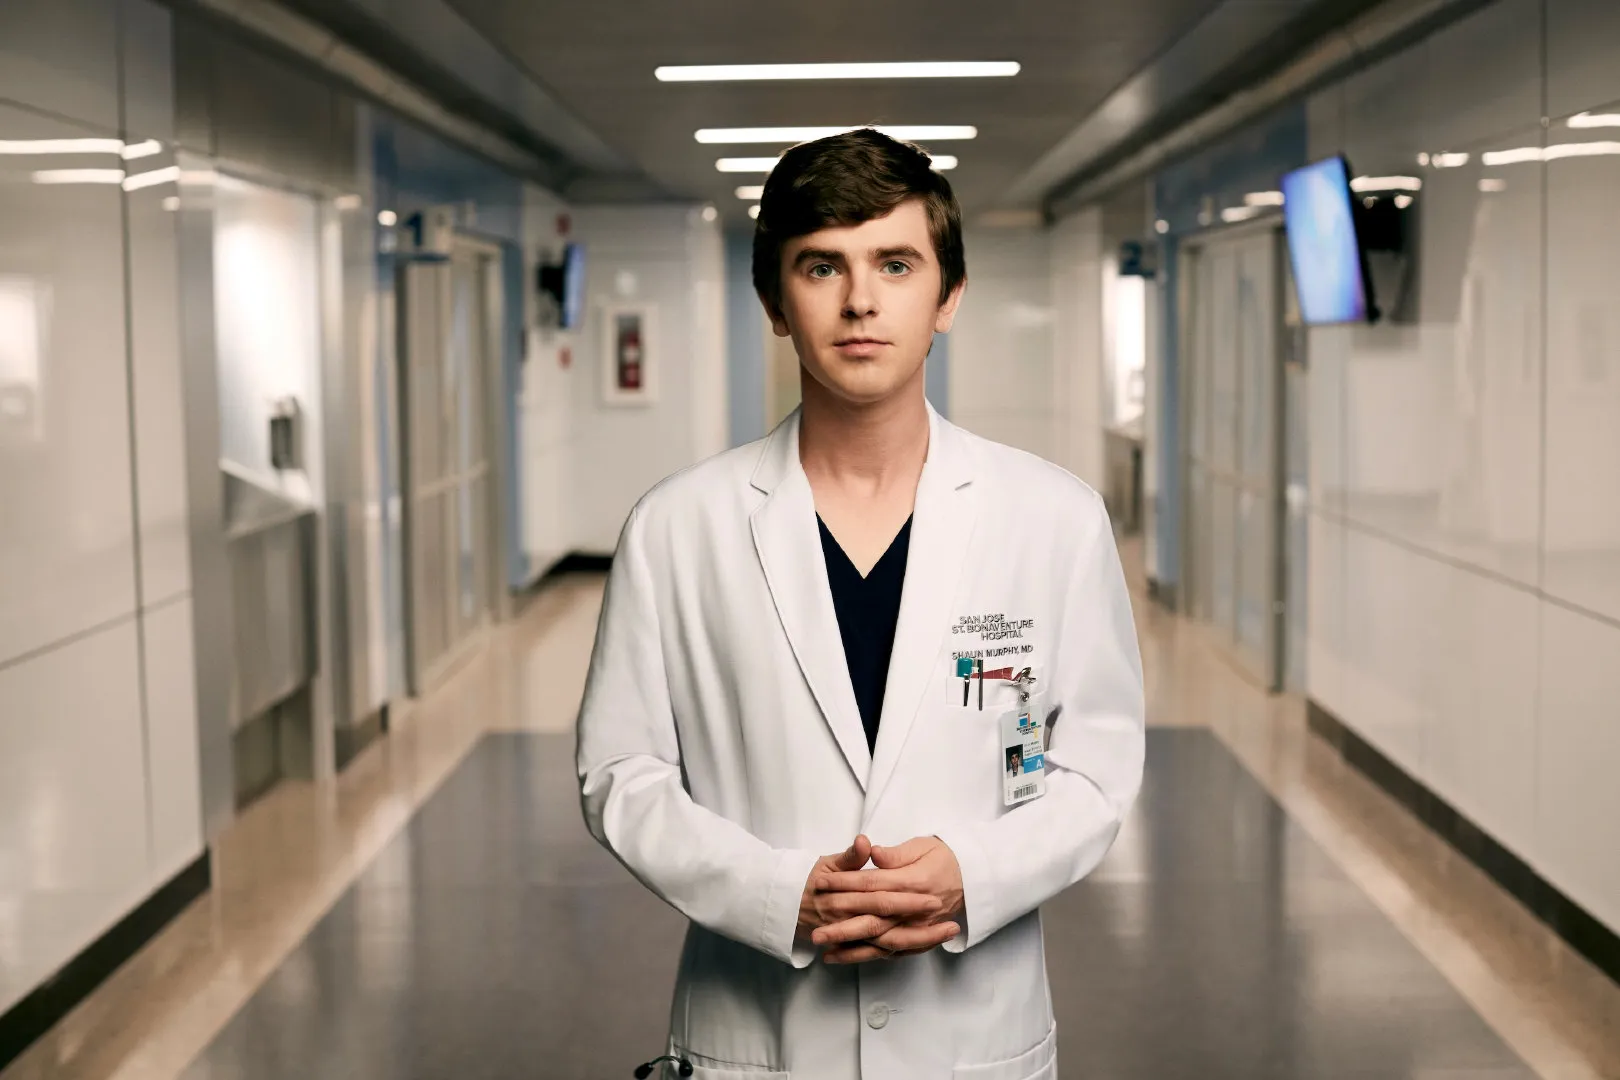 'The Good Lawyer': Popular American drama 'The Good Doctor' plans to launch a legal spin-off series | FMV6